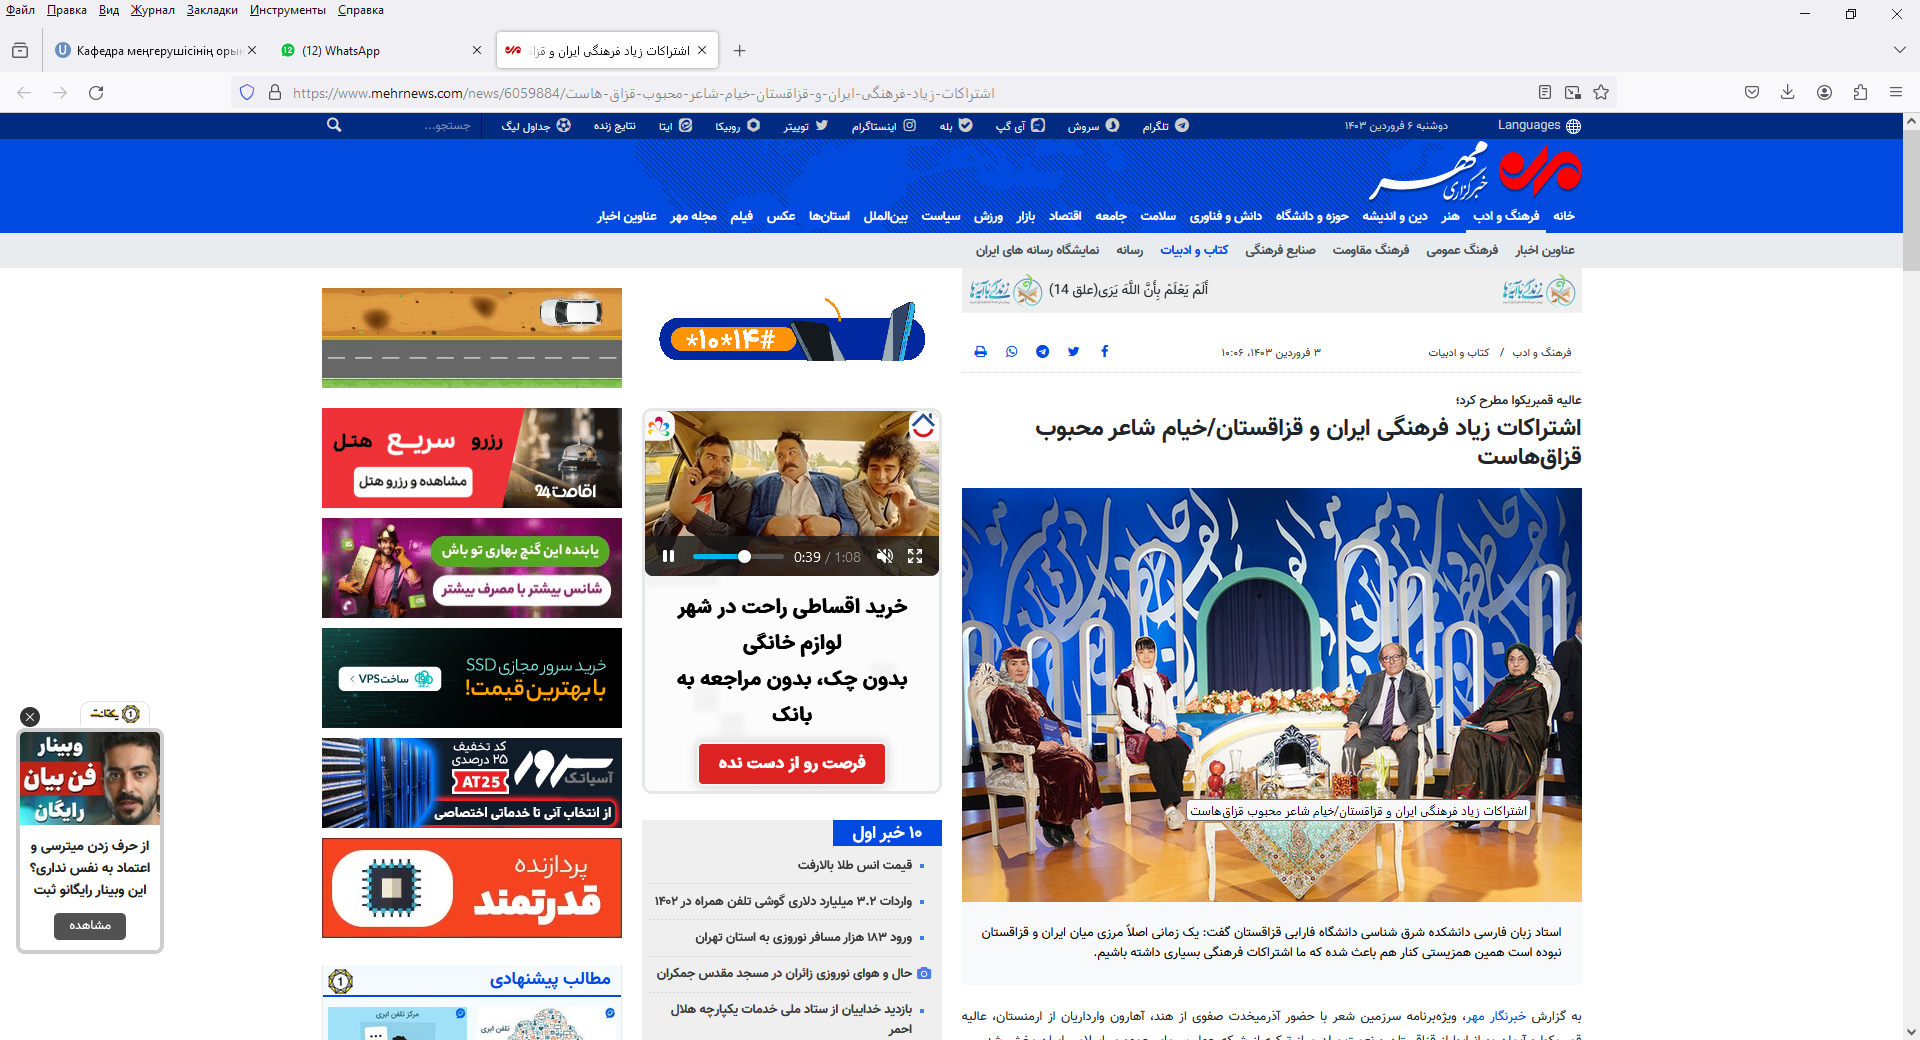 Teachers of the Department of the Middle East and South Asia gave an interview to the Iranian news agency Mehr